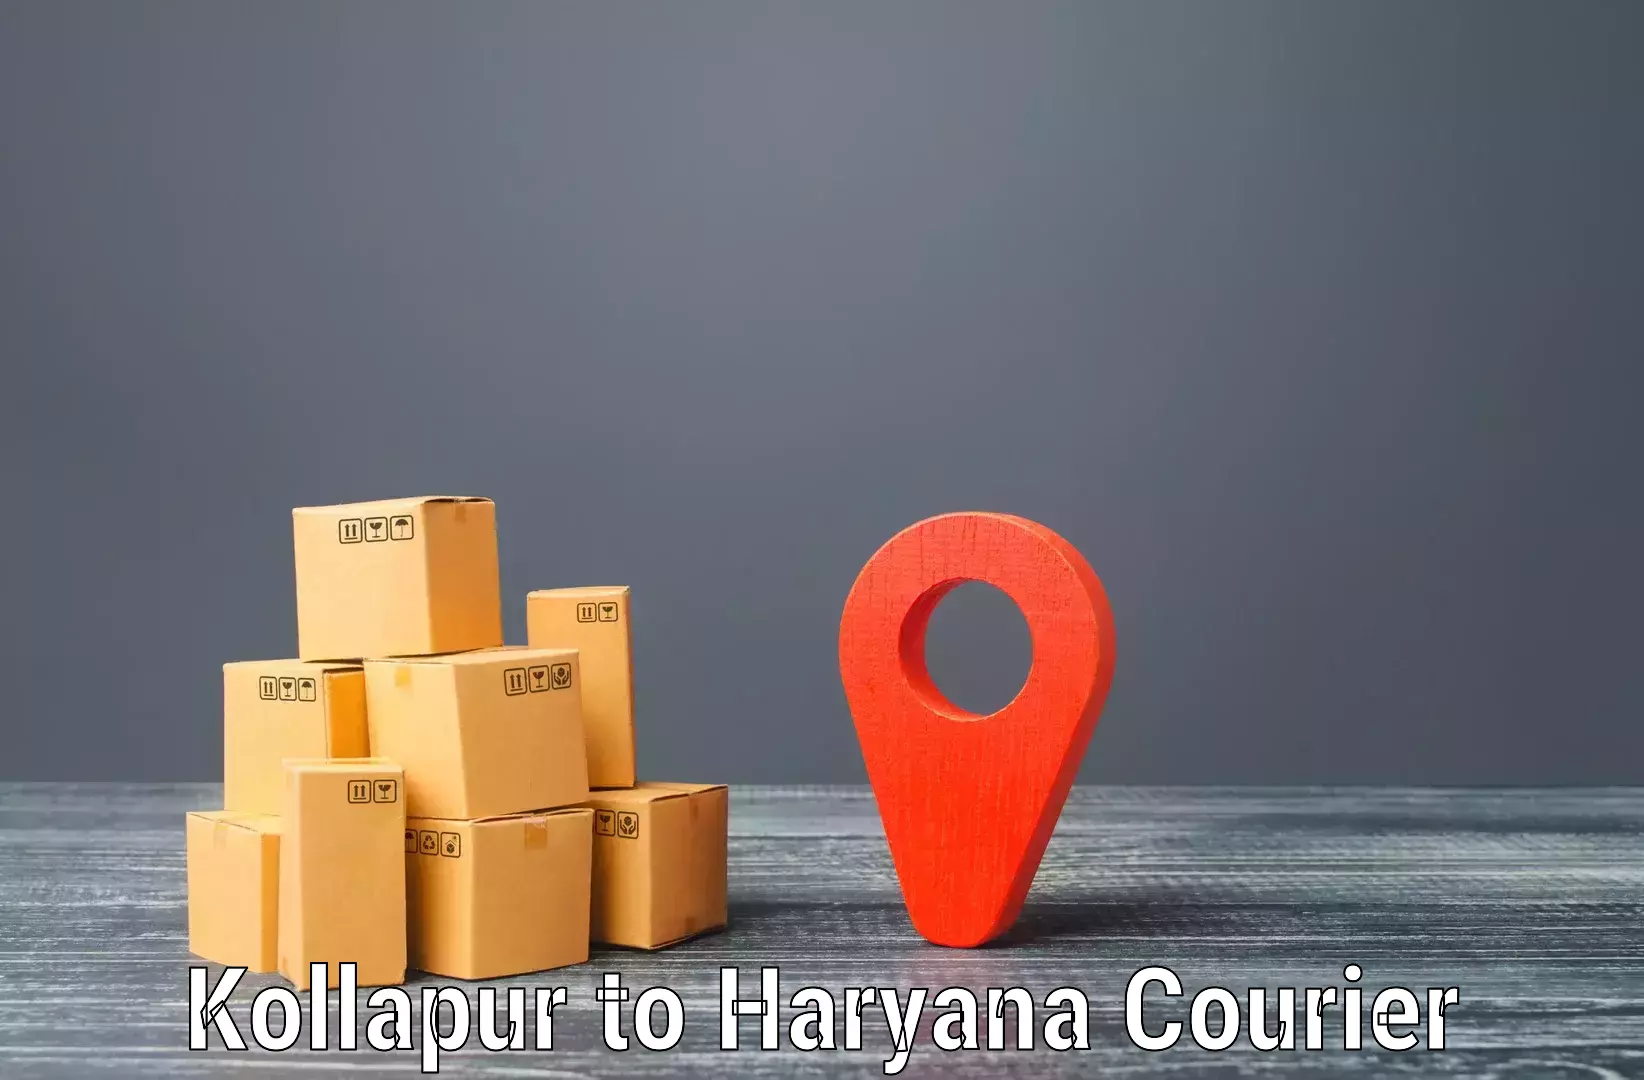 Automated parcel services in Kollapur to Kalanwali